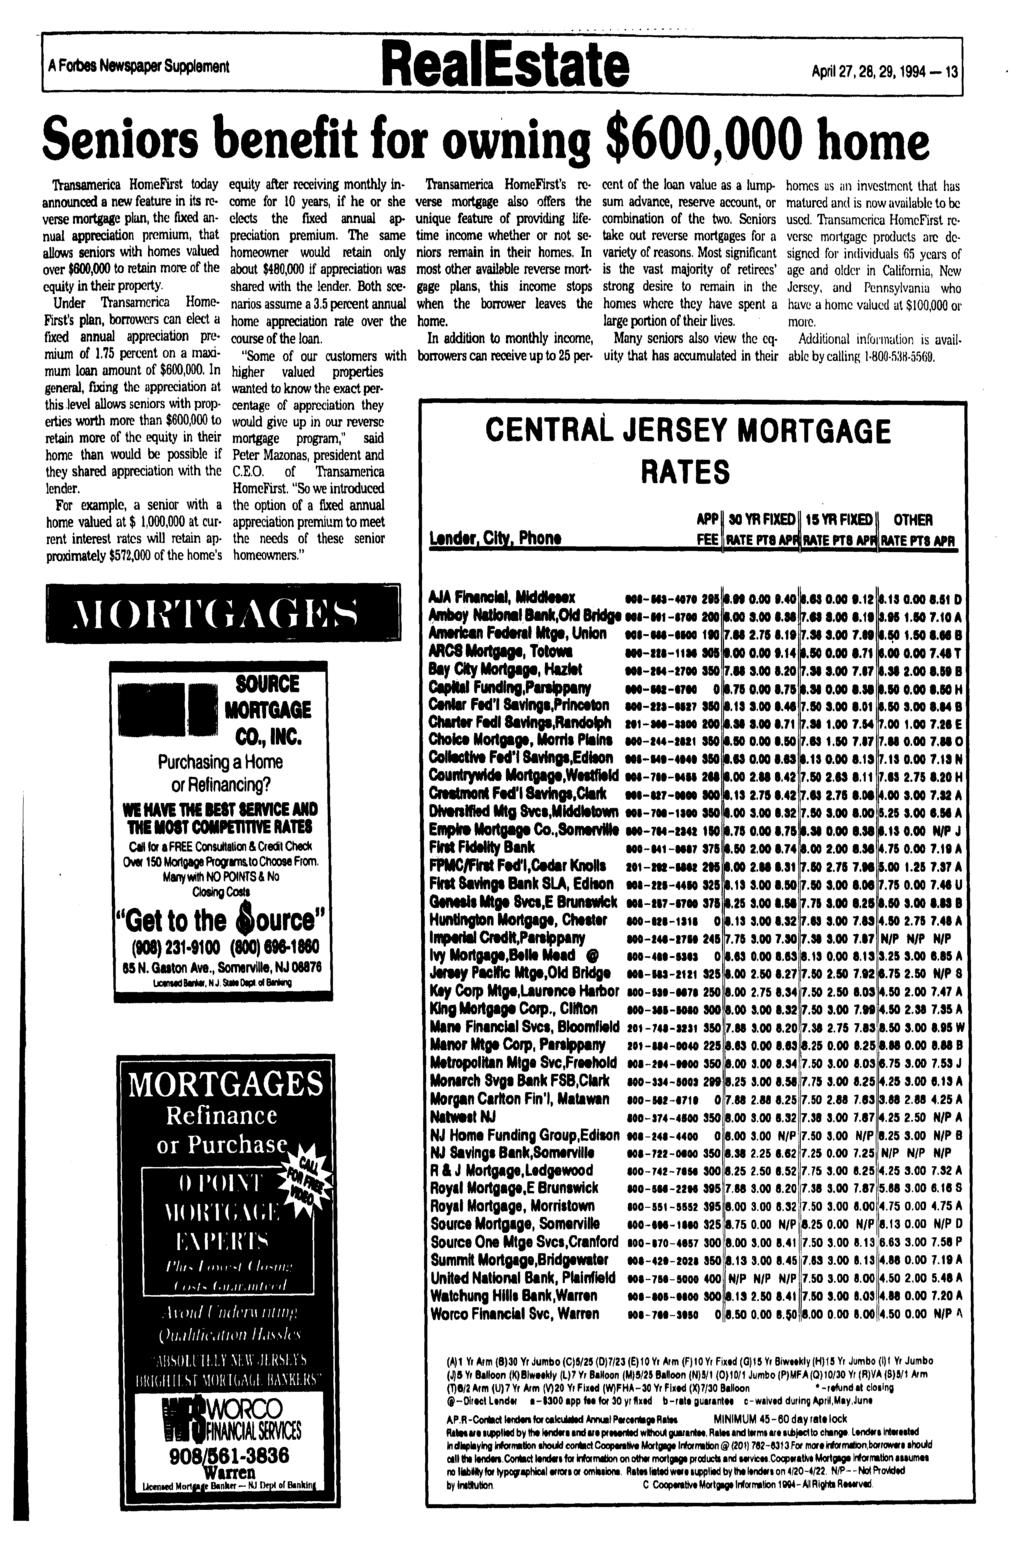 A Forbes Newspaper Supplement RealEstate April 27,28,29,1994-13 Seniors benefit for owning $600,000 home Transamerica HomeFirst today announced a new feature in its reverse equity after receiving